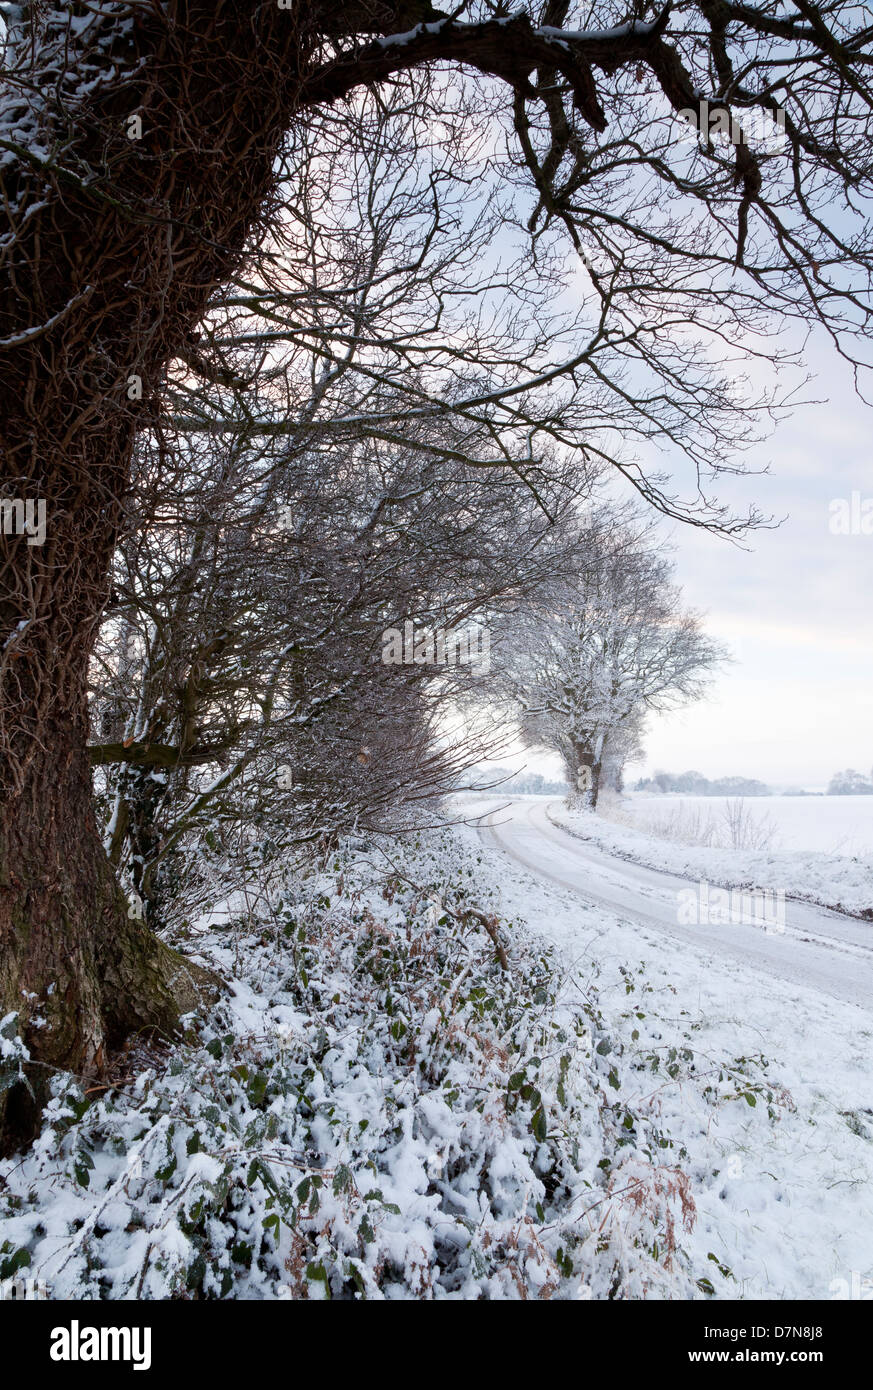 A country road in a snow covered landscape Stock Photo